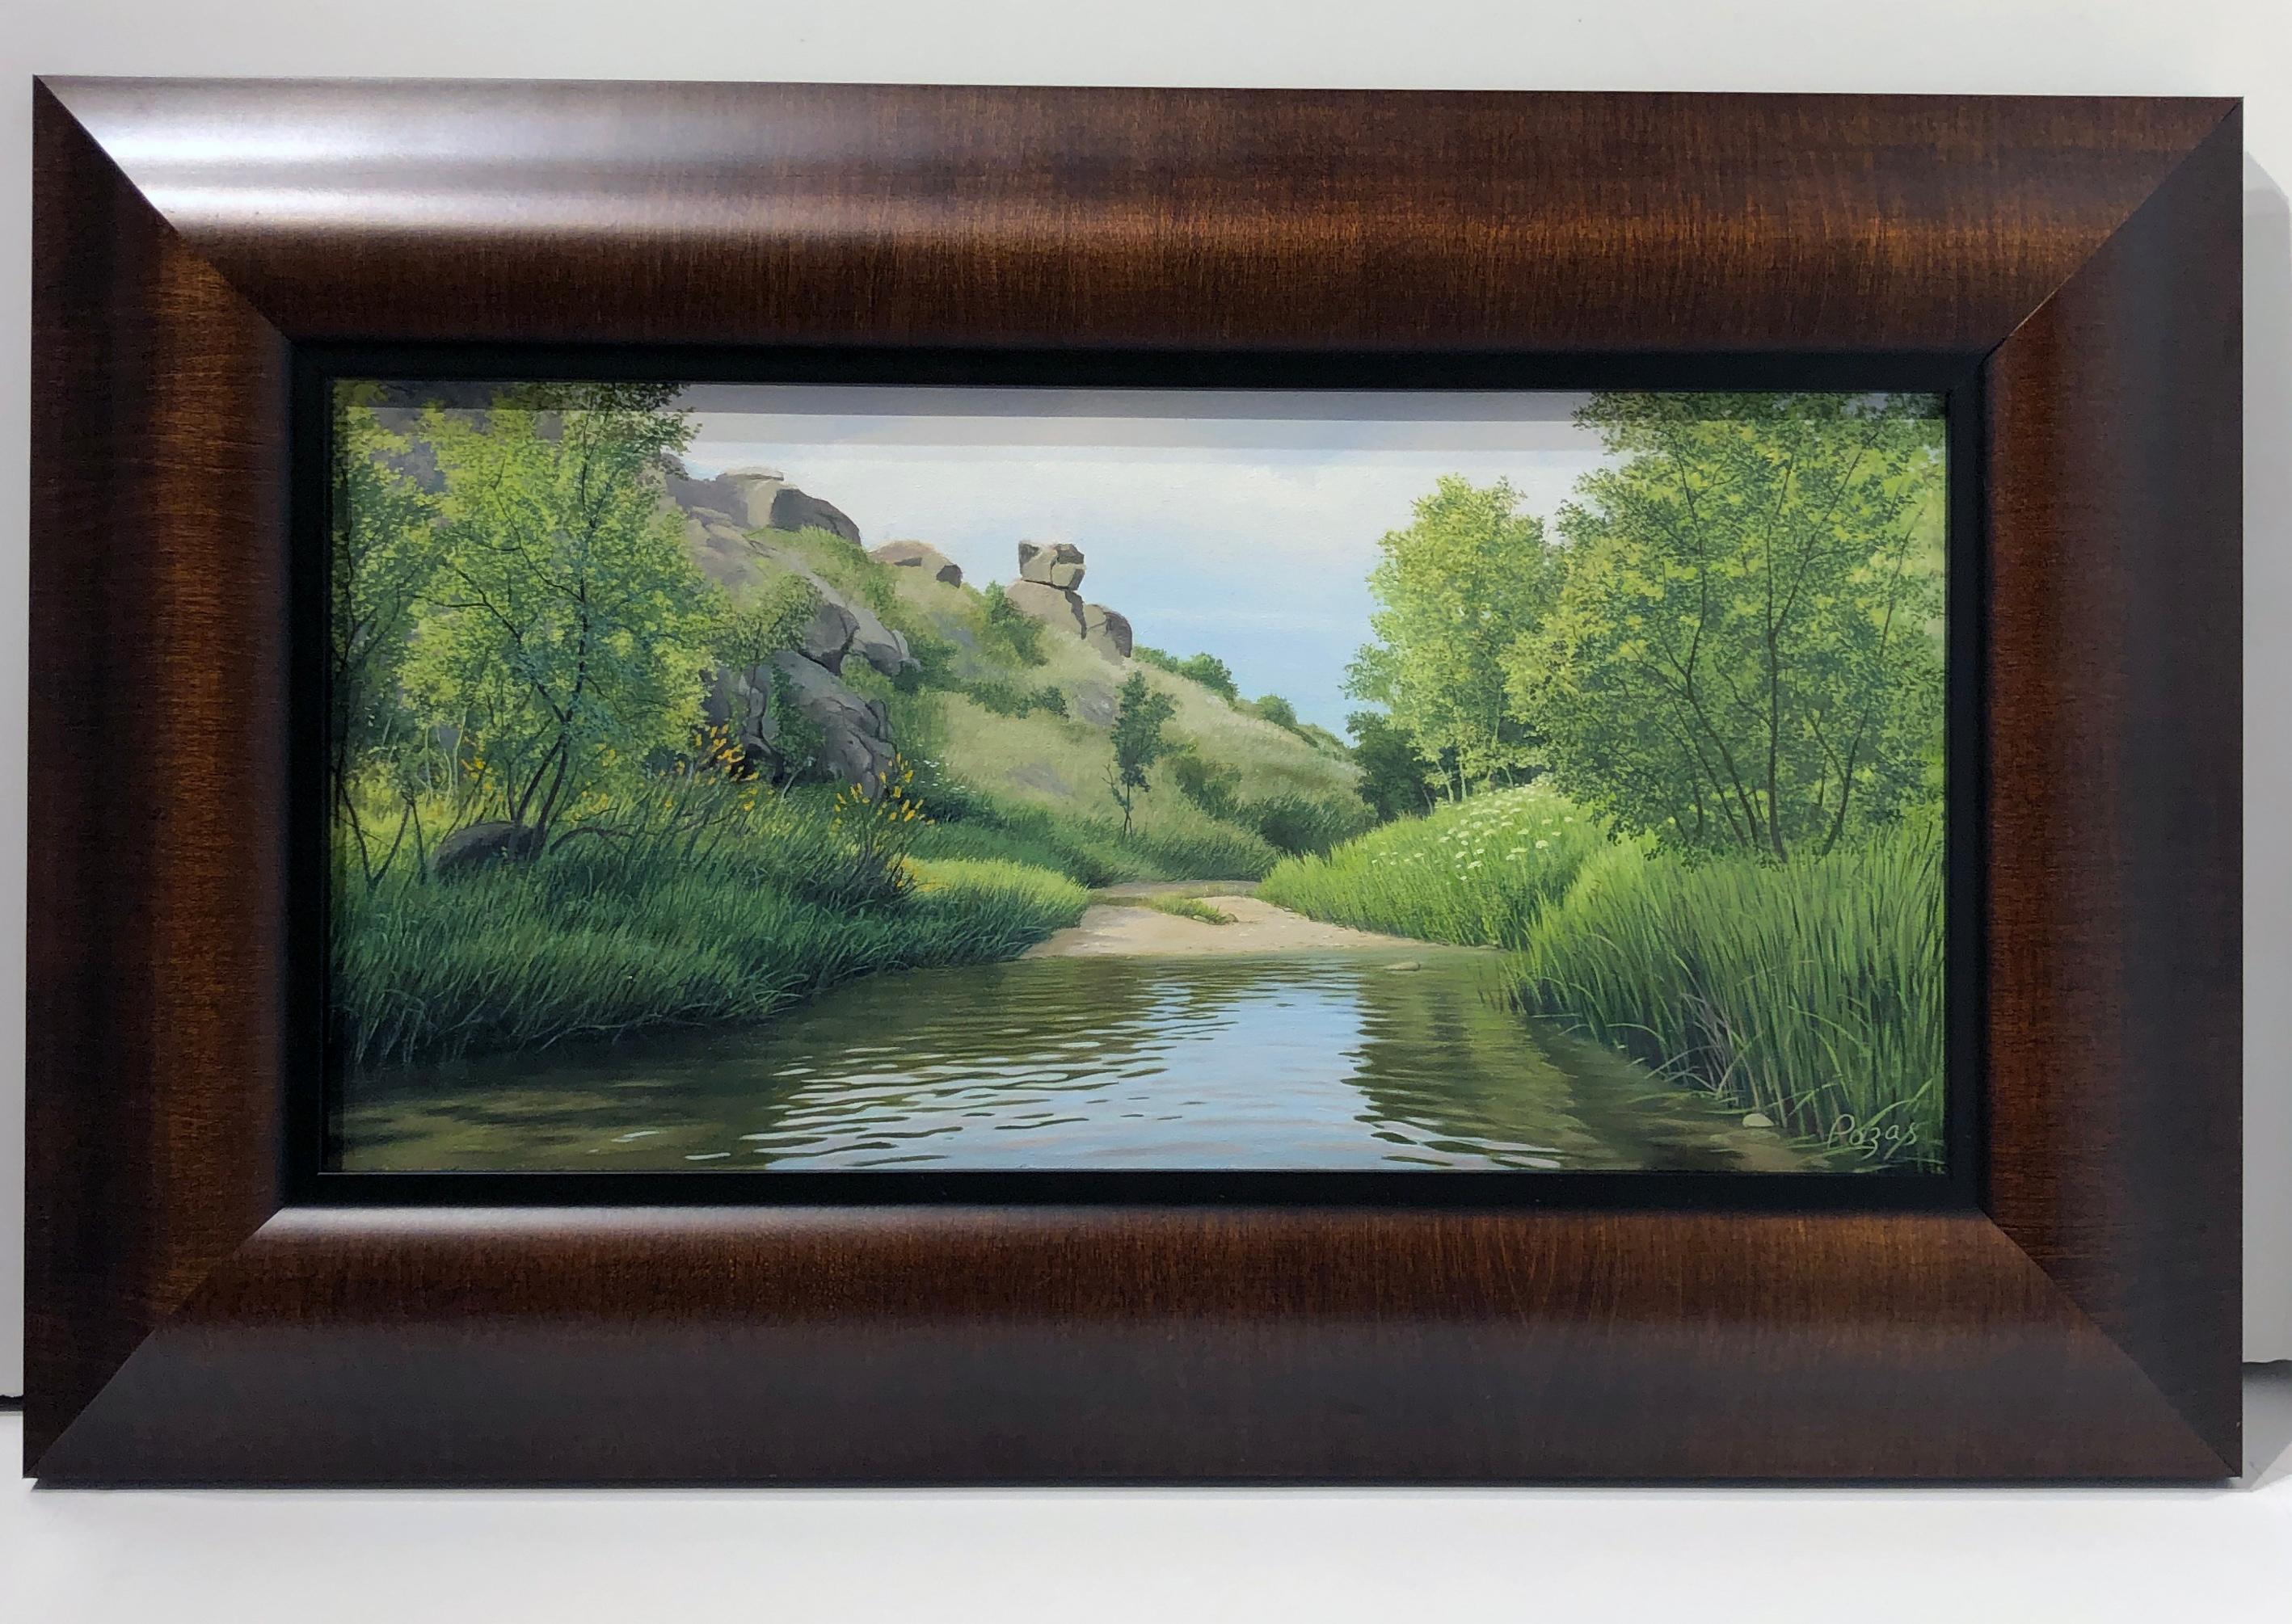 The Illusion of Havana, Highly Detailed Landscape with Water & Rolling Hills - Painting by René Monzón Relova “Pozas”